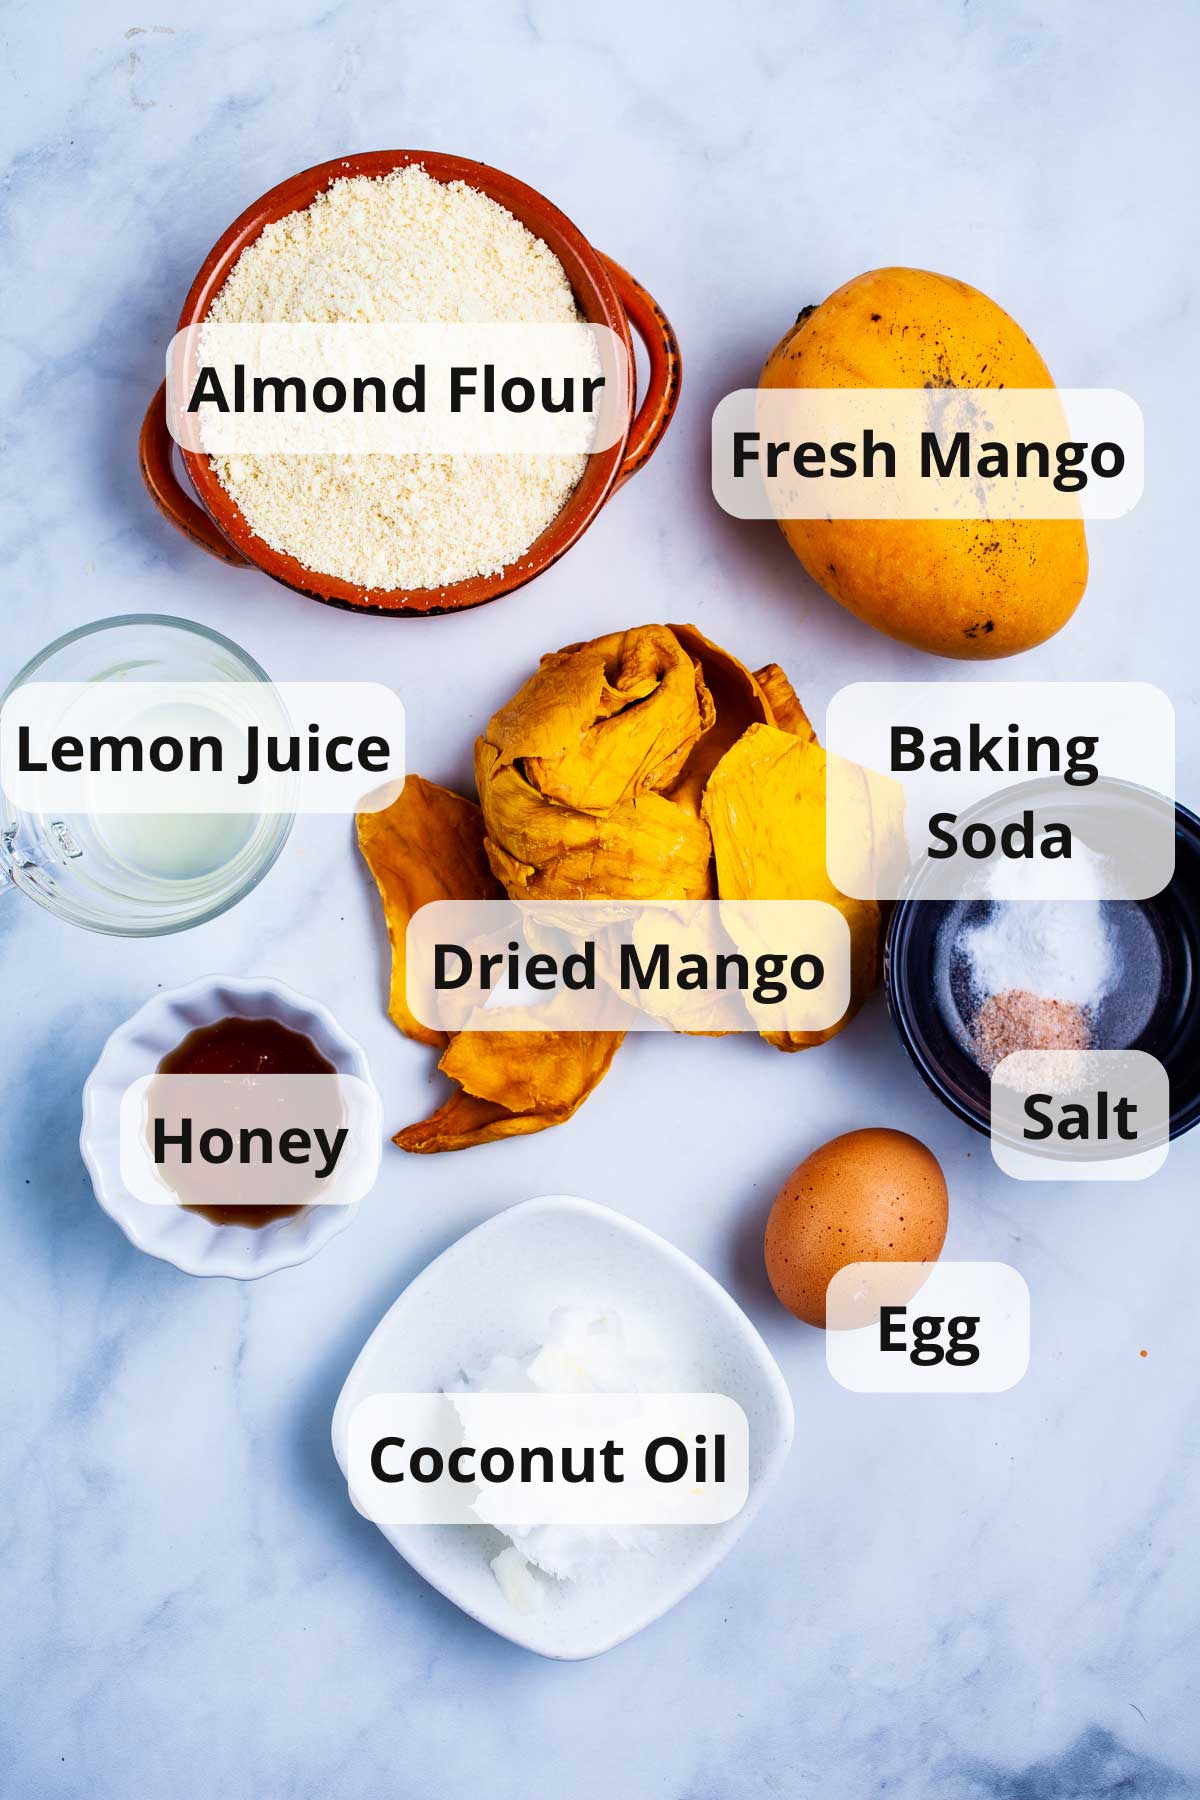 A series of ingredients displayed on a table to make fresh mango cookies.